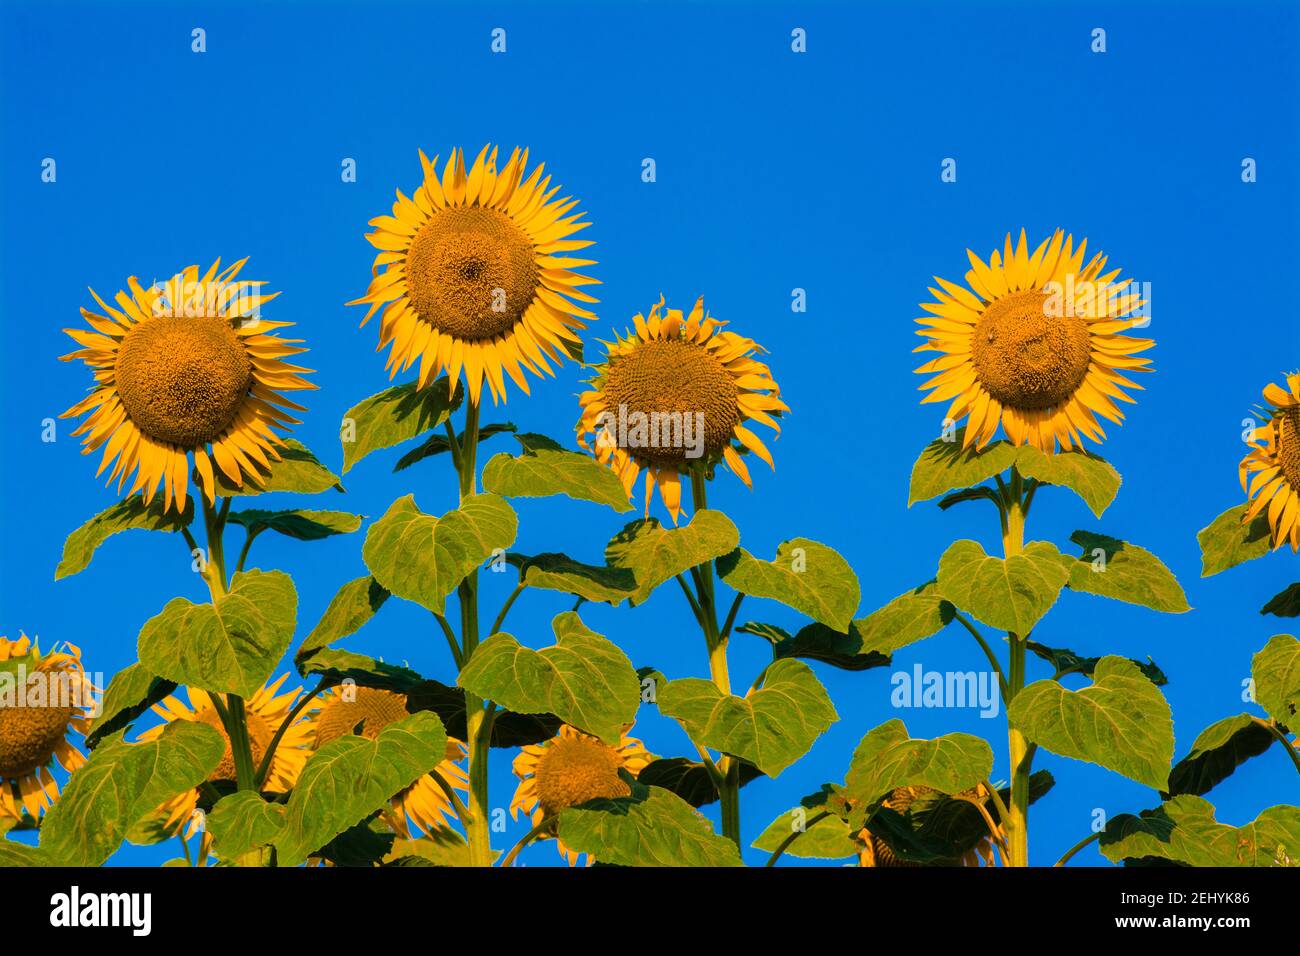 A field of Sunflowers, Helianthus annuus, Limagne, Auvergne, France Stock Photo